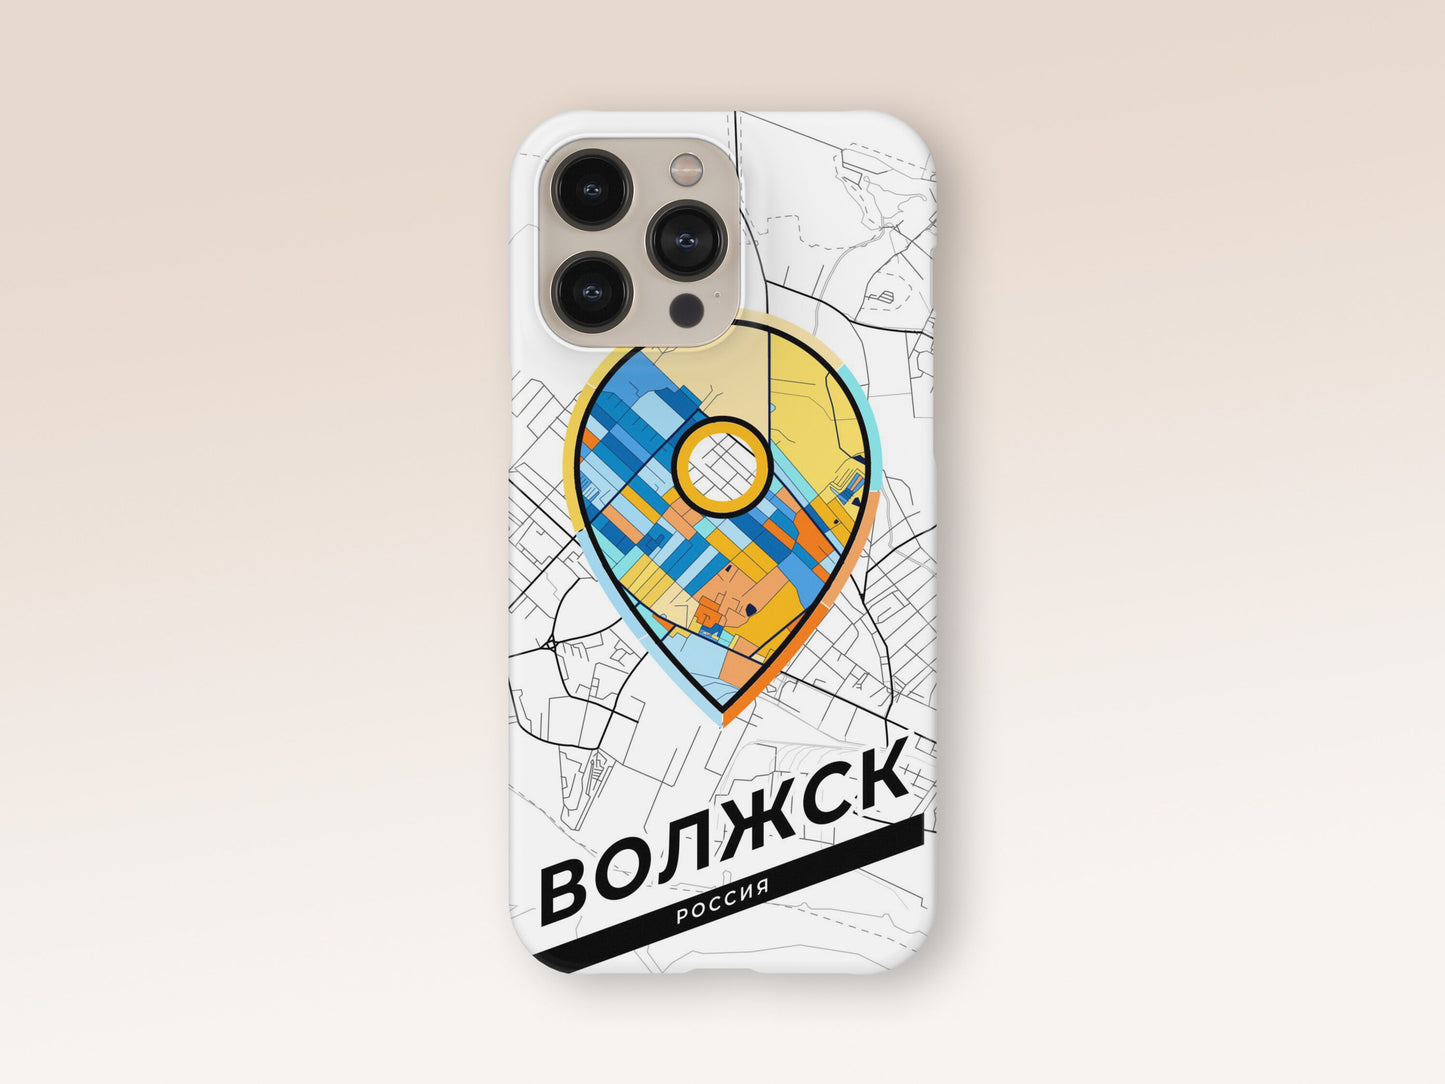 Volzhsk Russia slim phone case with colorful icon 1